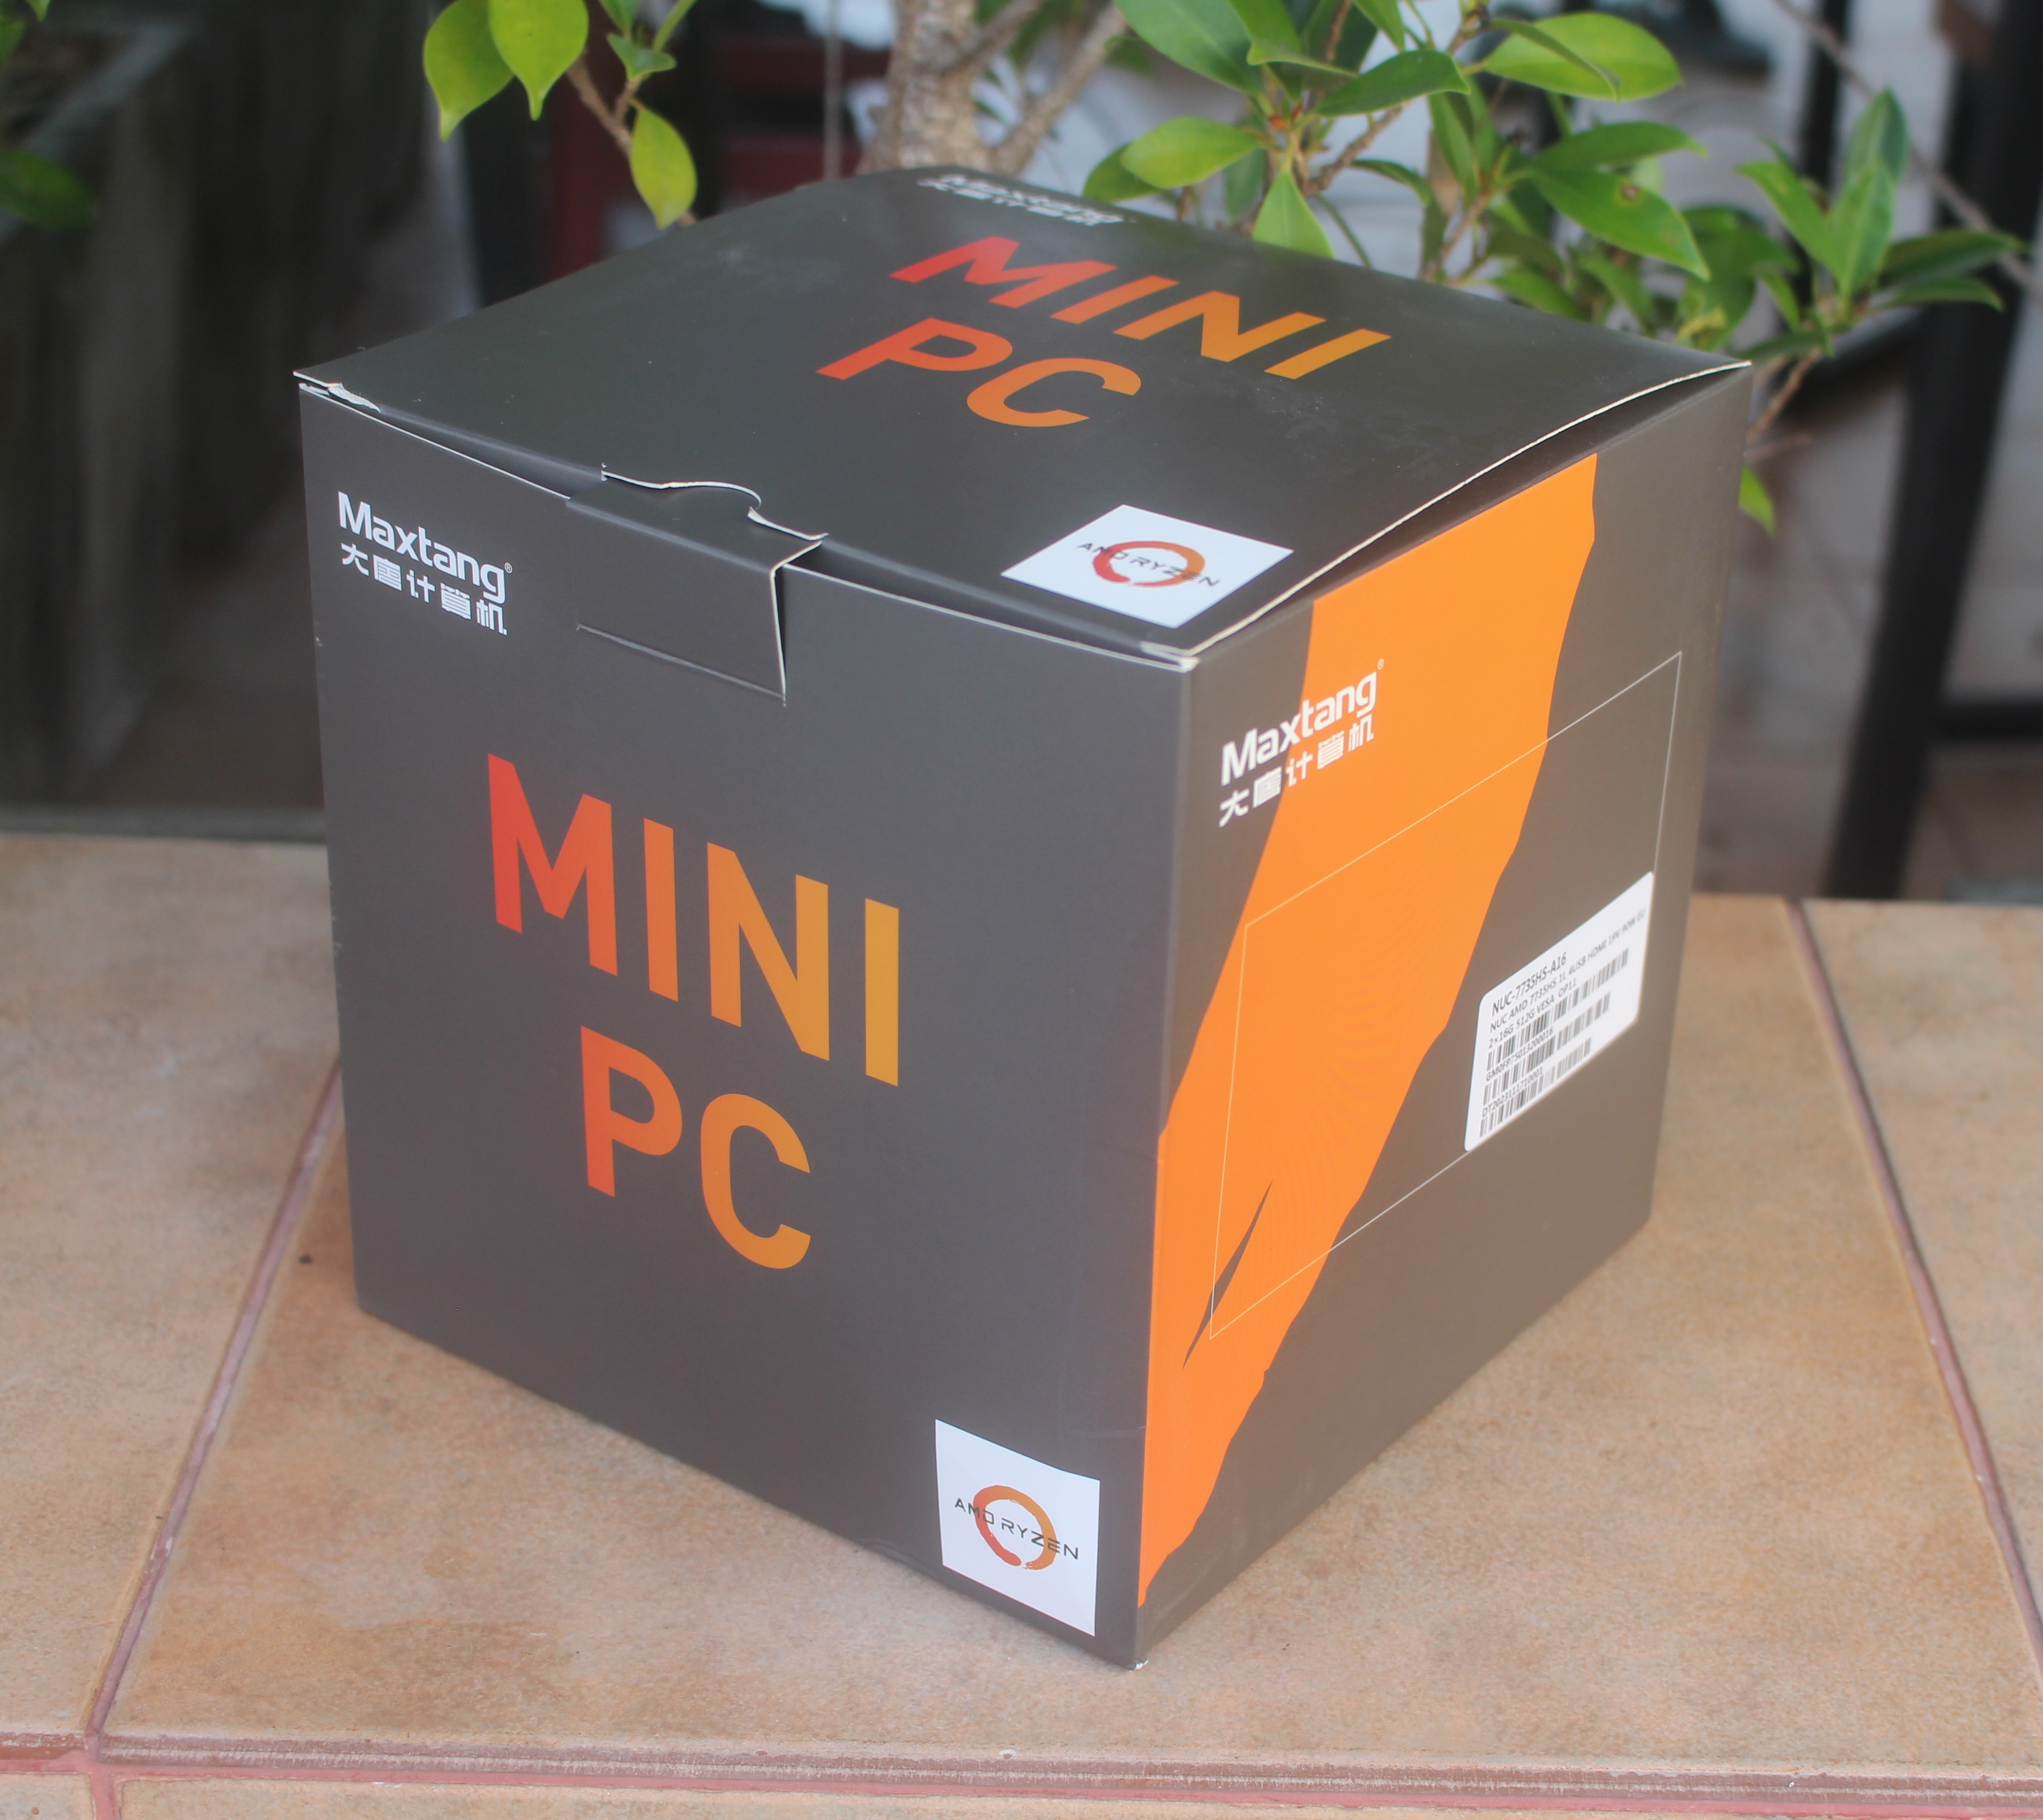 Maxtang MTN-FP750 (Ryzen 7 7735HS) mini PC review - Part1: Specs, unboxing,  teardown, and first boot - CNX Software